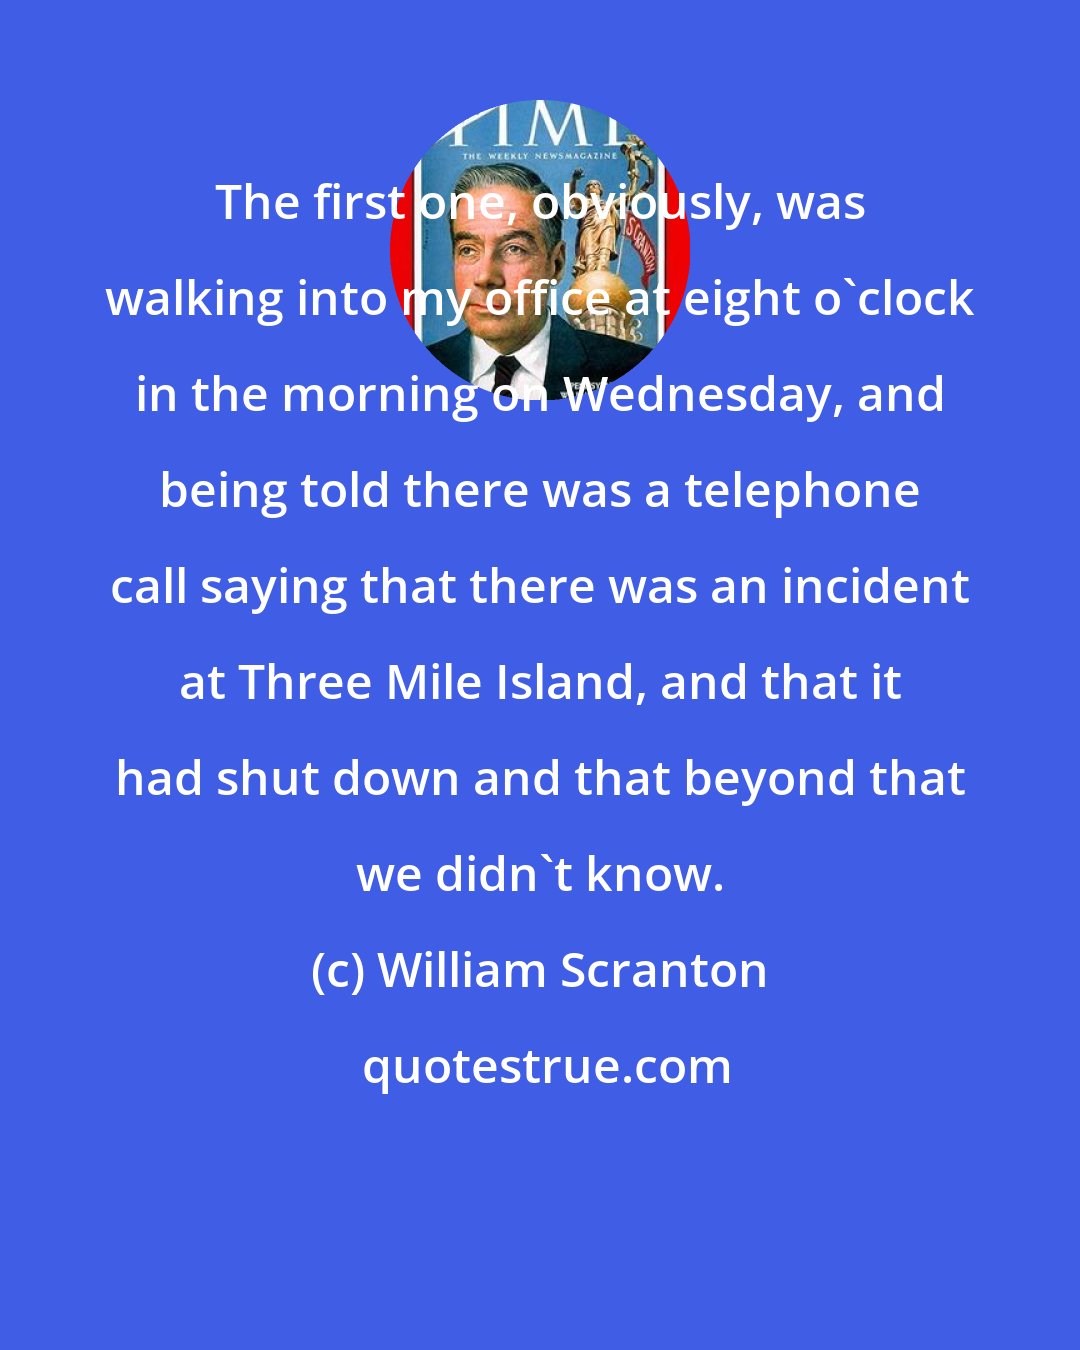 William Scranton: The first one, obviously, was walking into my office at eight o'clock in the morning on Wednesday, and being told there was a telephone call saying that there was an incident at Three Mile Island, and that it had shut down and that beyond that we didn't know.